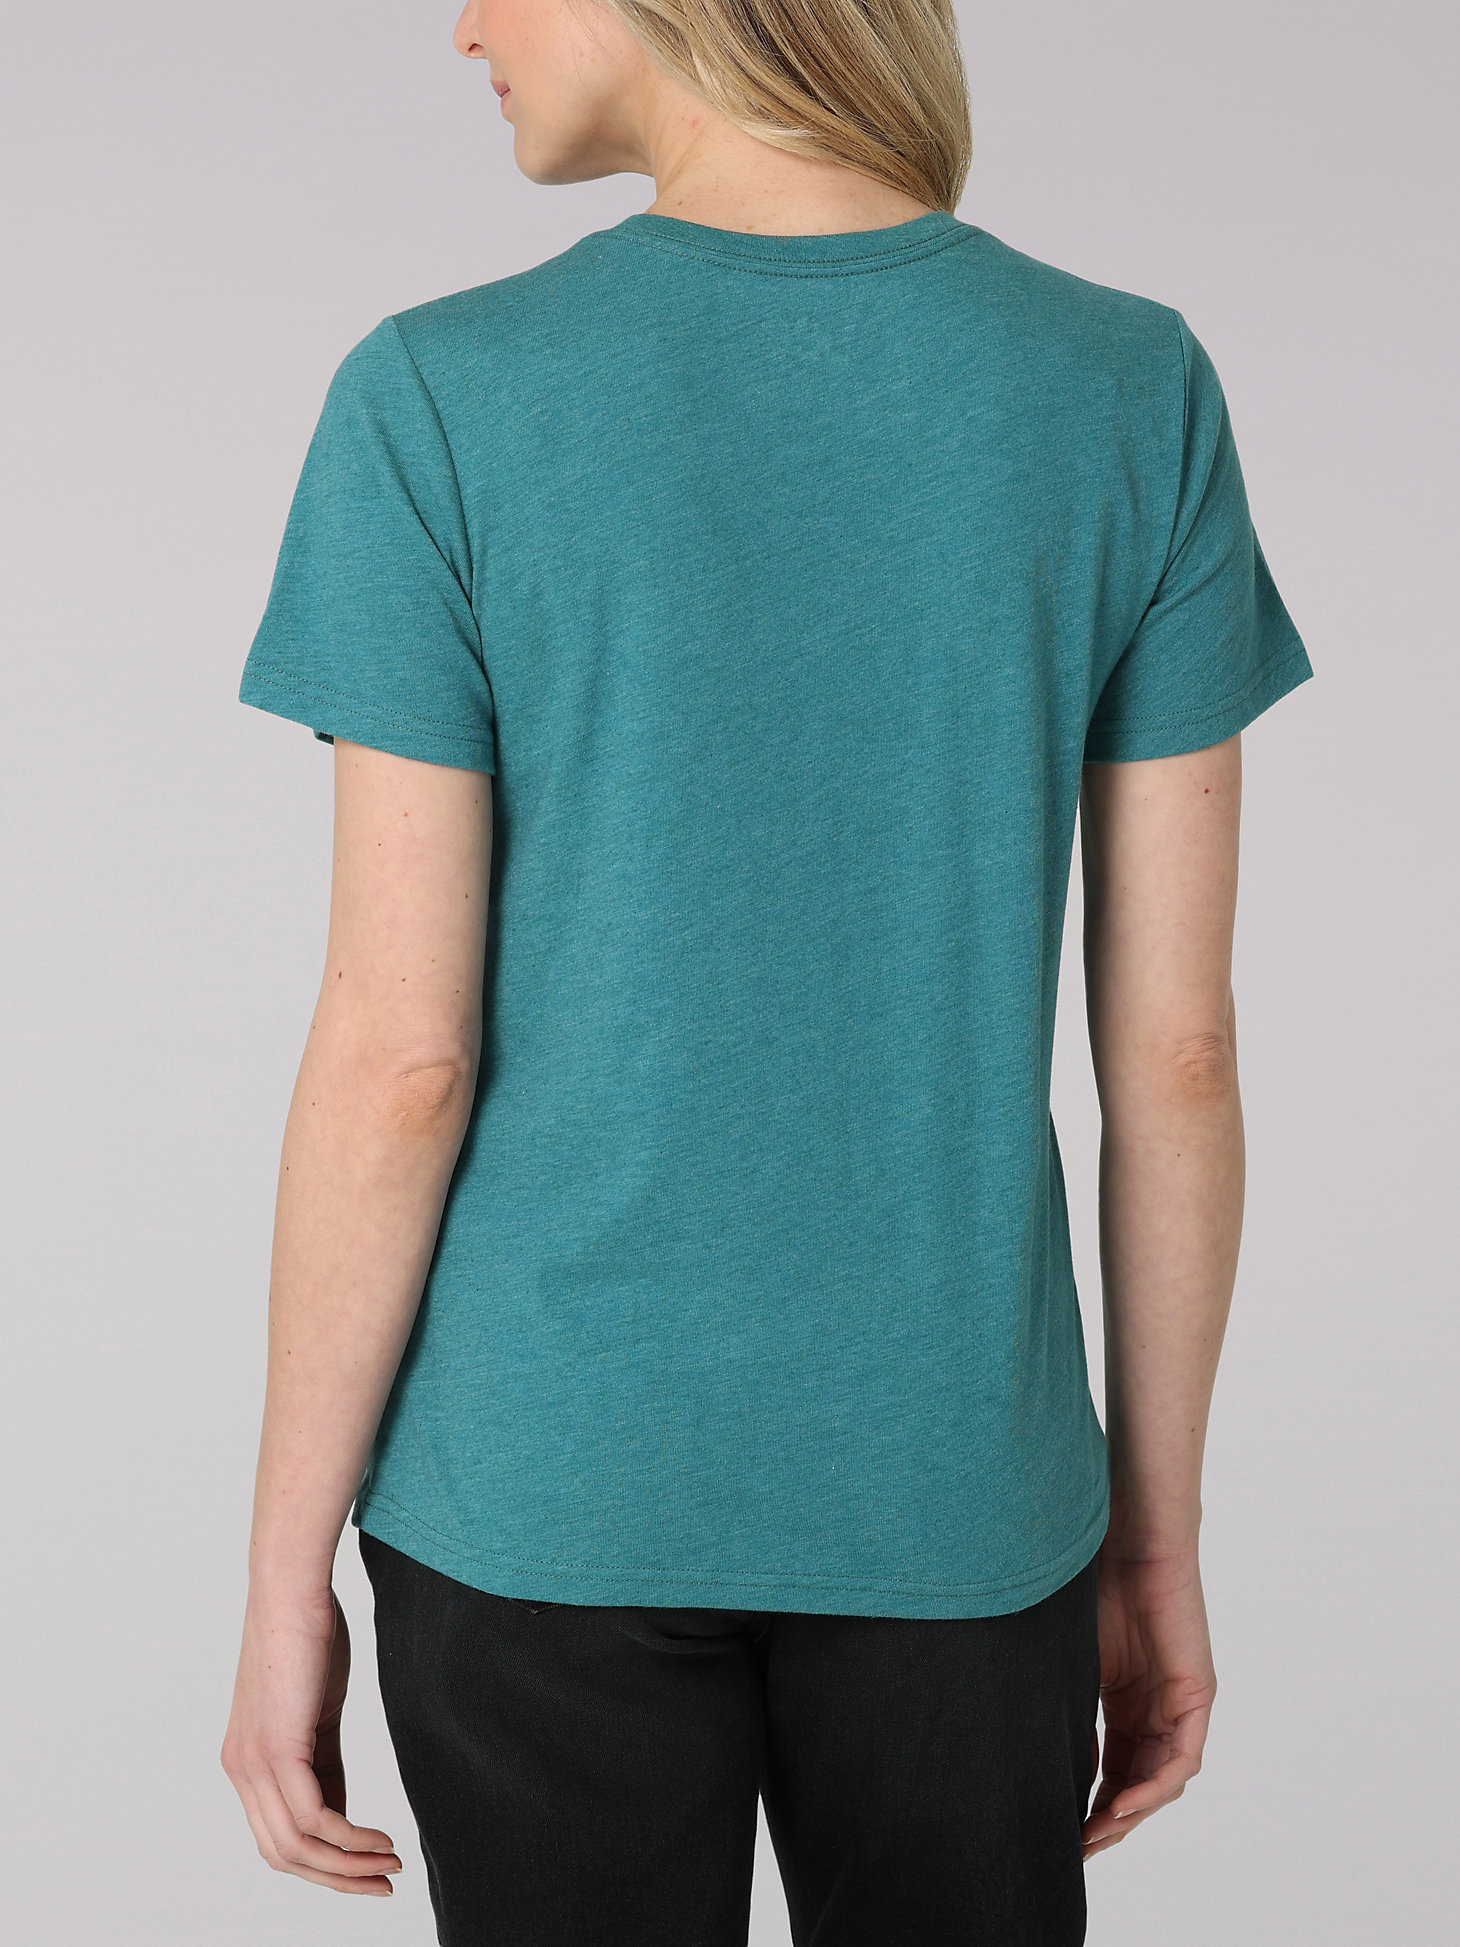 Women's Lee Be Kind Graphic Tee in Midway Teal Heather alternative view 1